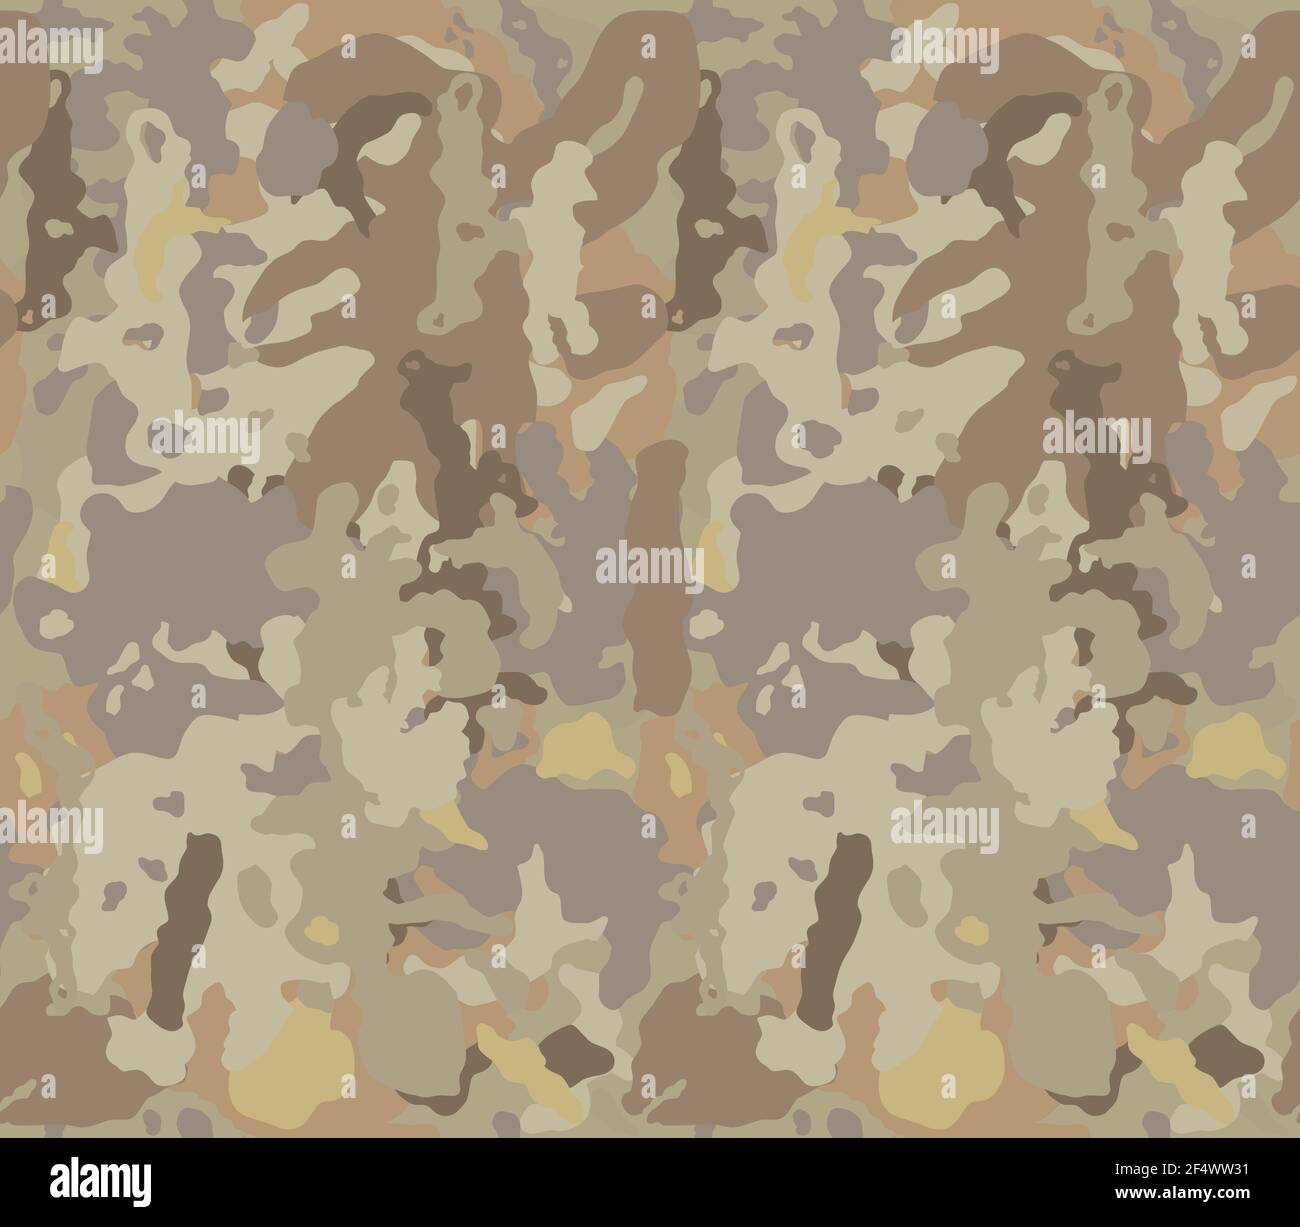 Stolpe lindre Vise dig Seamless texture military camouflage. Seamless desert camouflage pattern.  Camo vector pattern Stock Vector Image & Art - Alamy